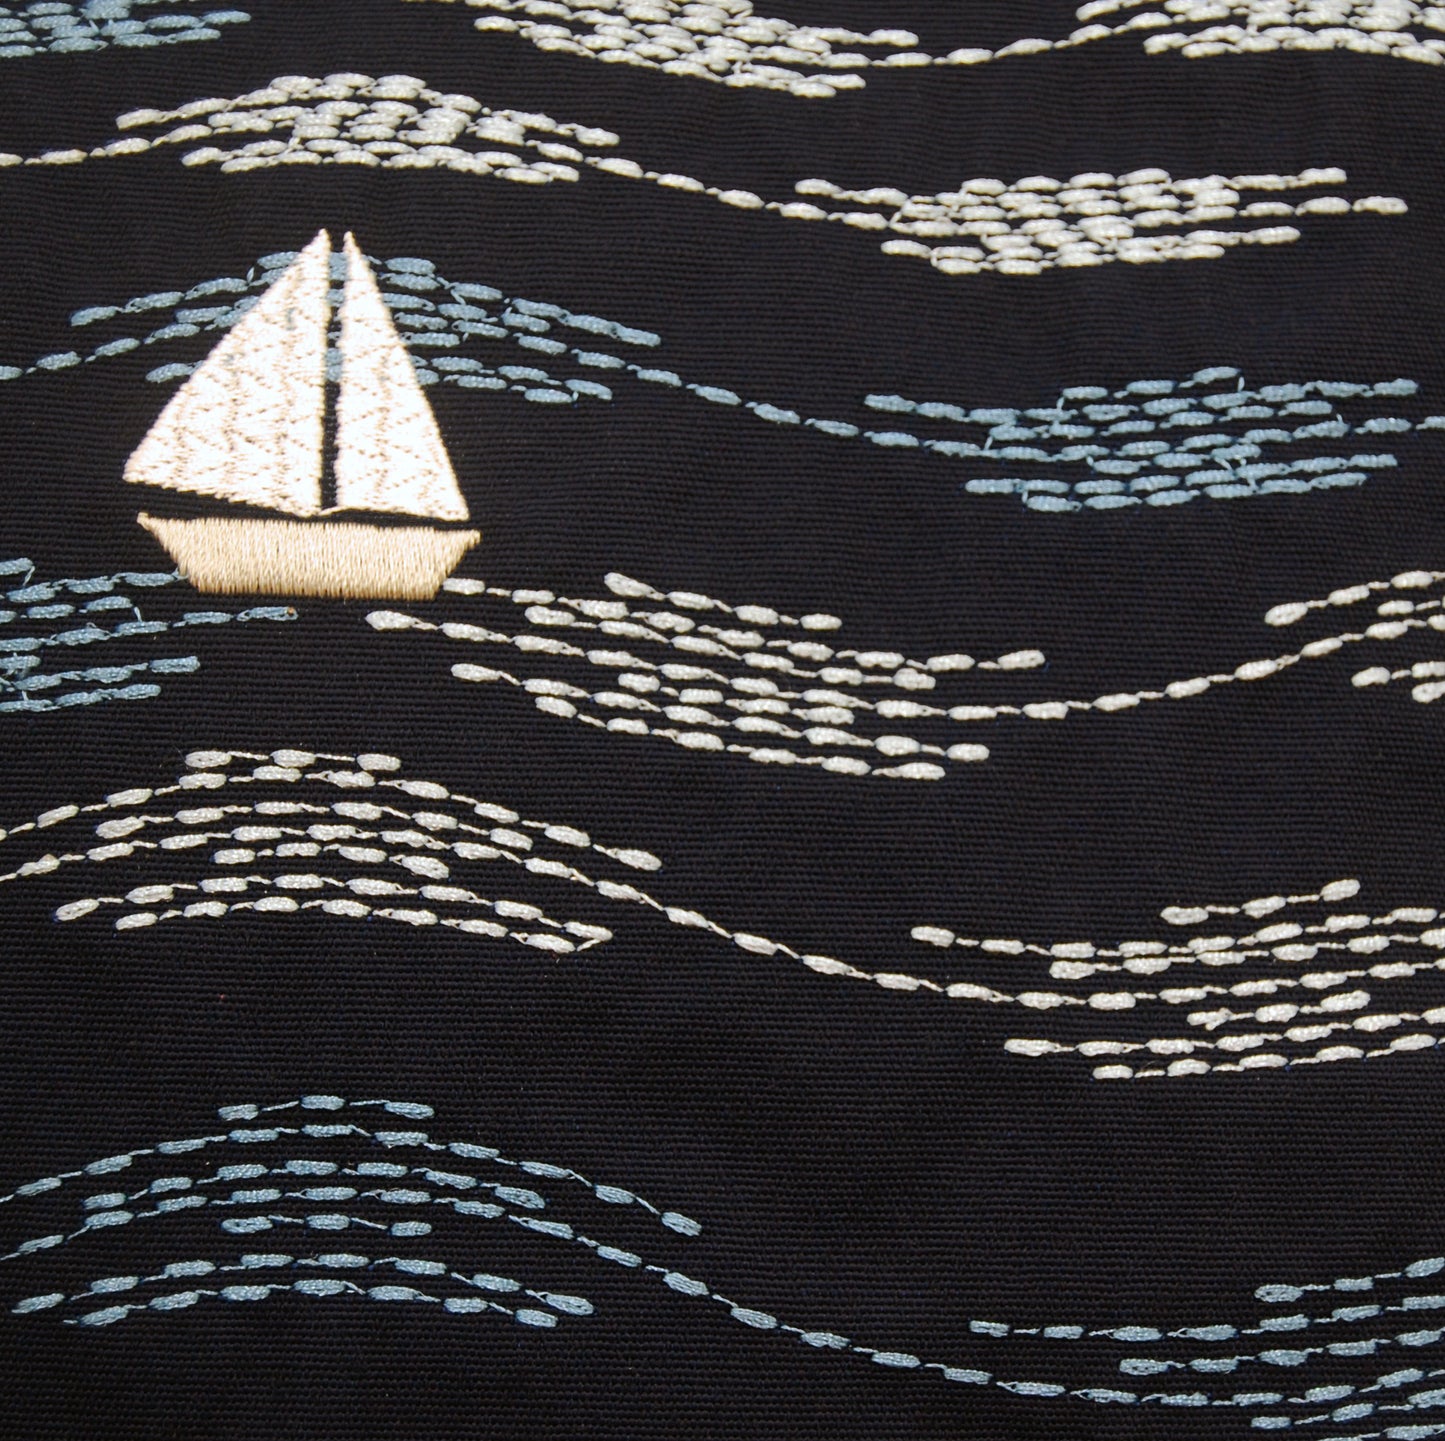 Detailed shot of the embroidered Cape Series Modern Waves pillow